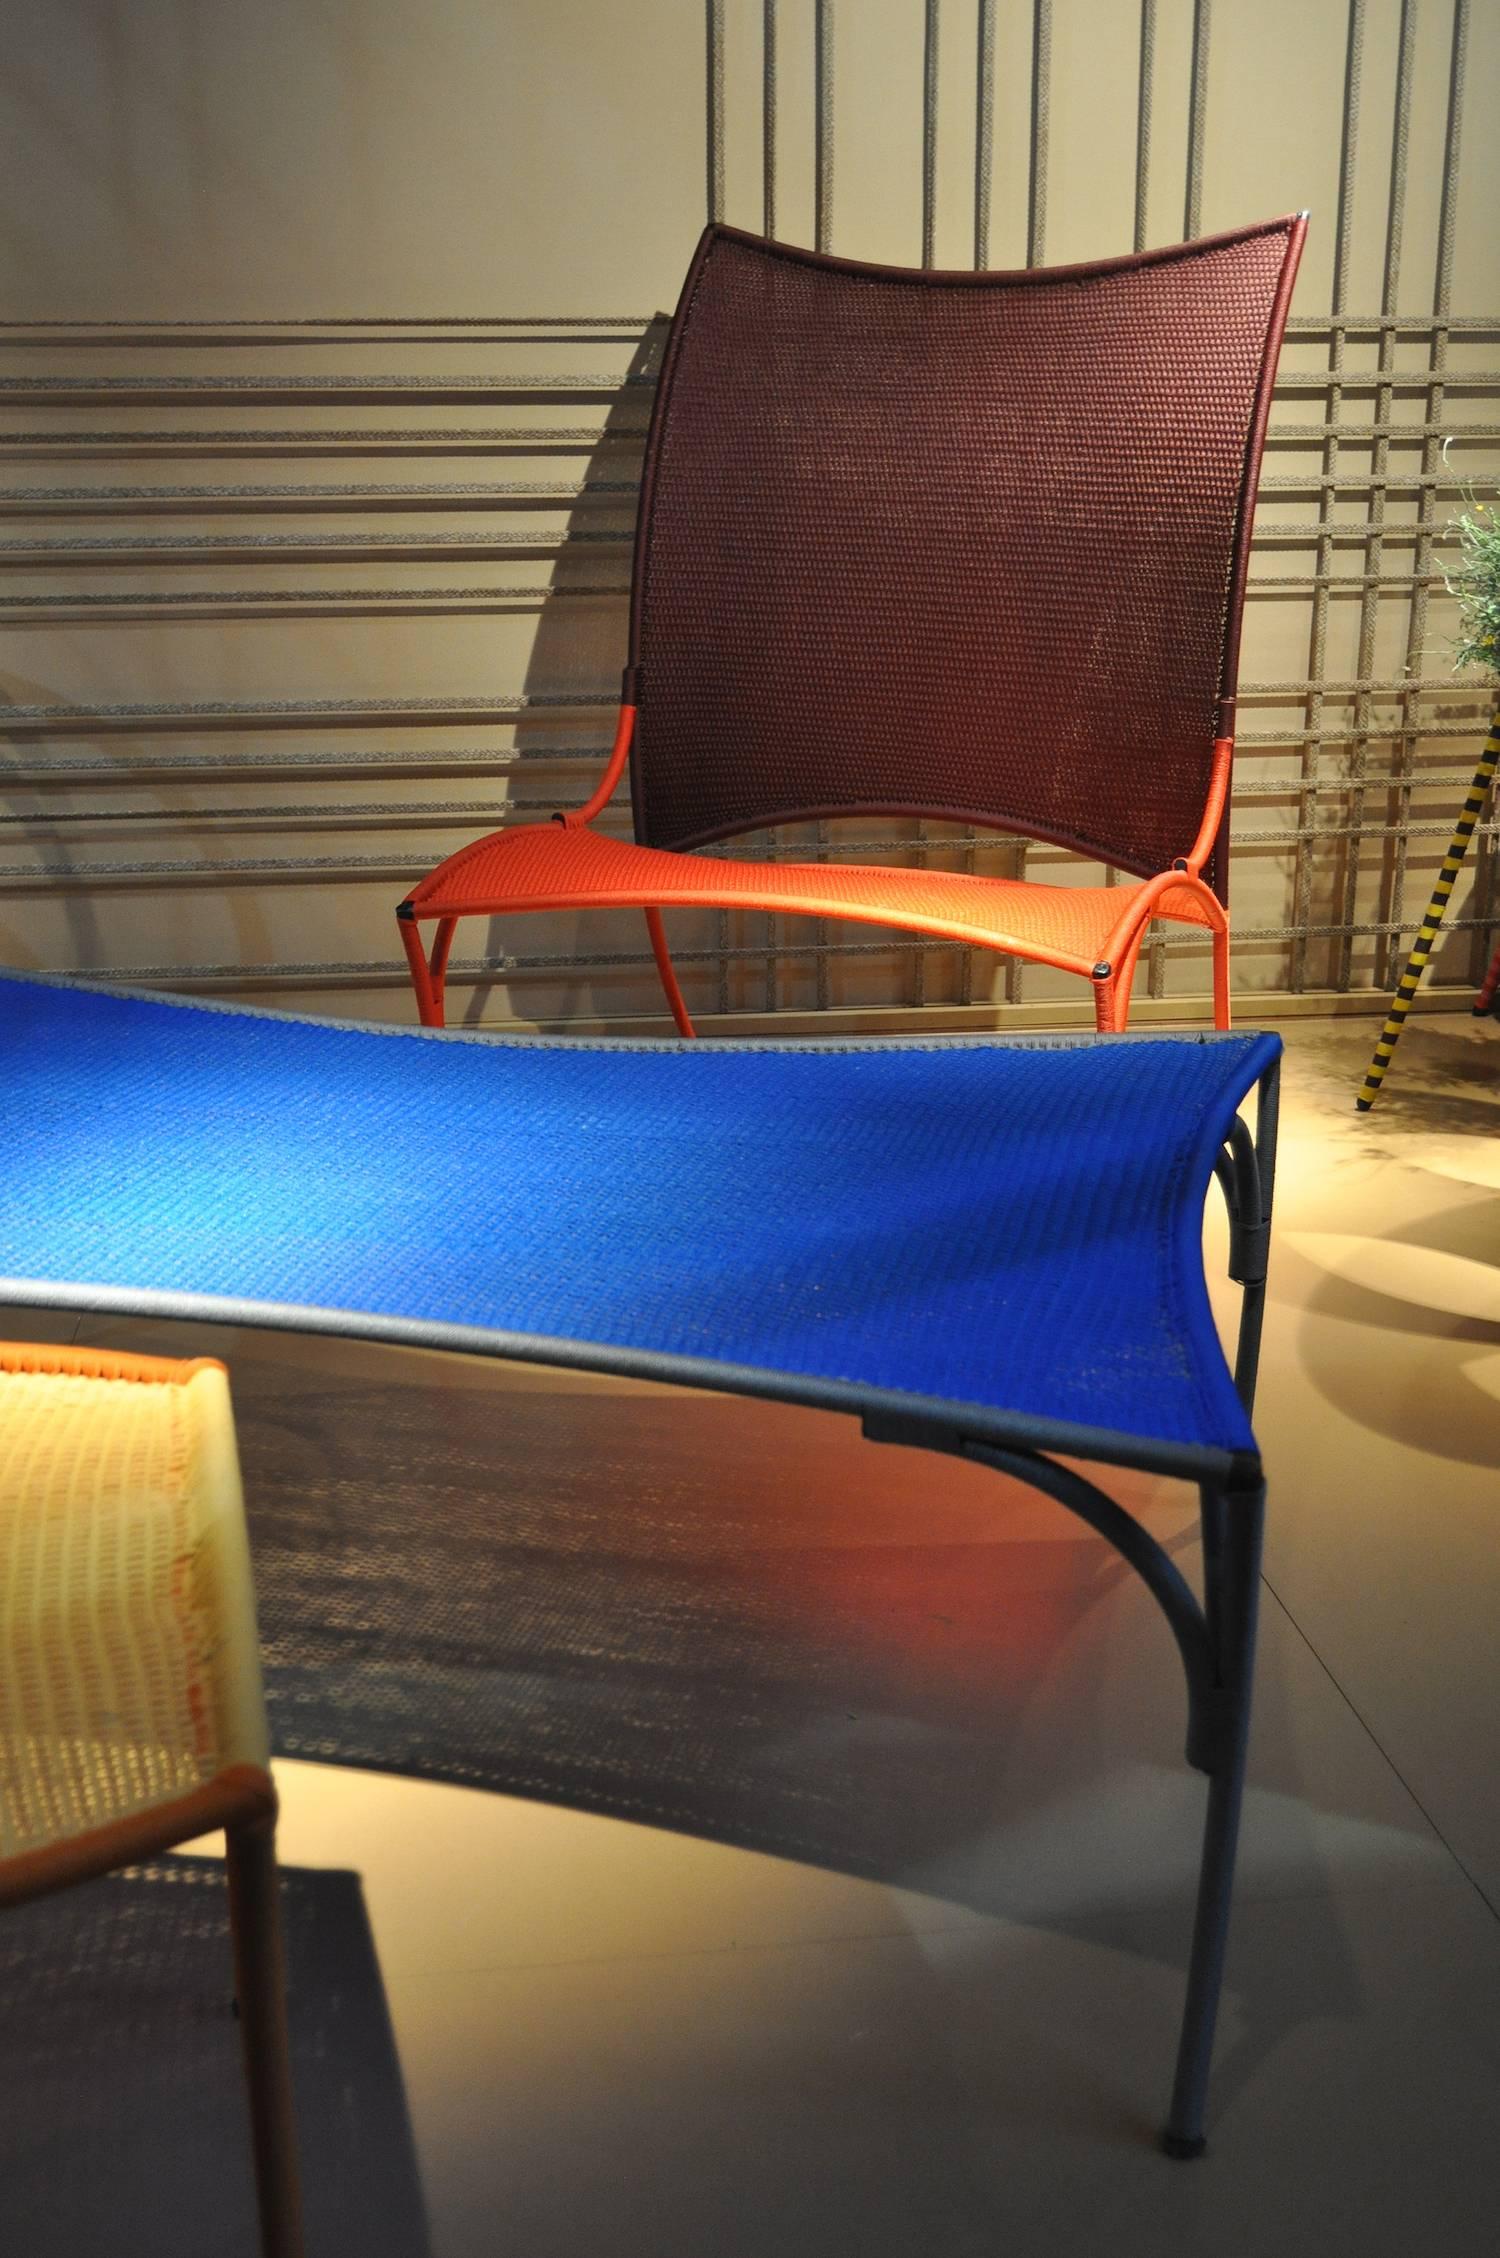 Hand-Woven Arco Chair B. by Martino Gamper for Moroso for Indoor/Outdoor in Multi-Color For Sale